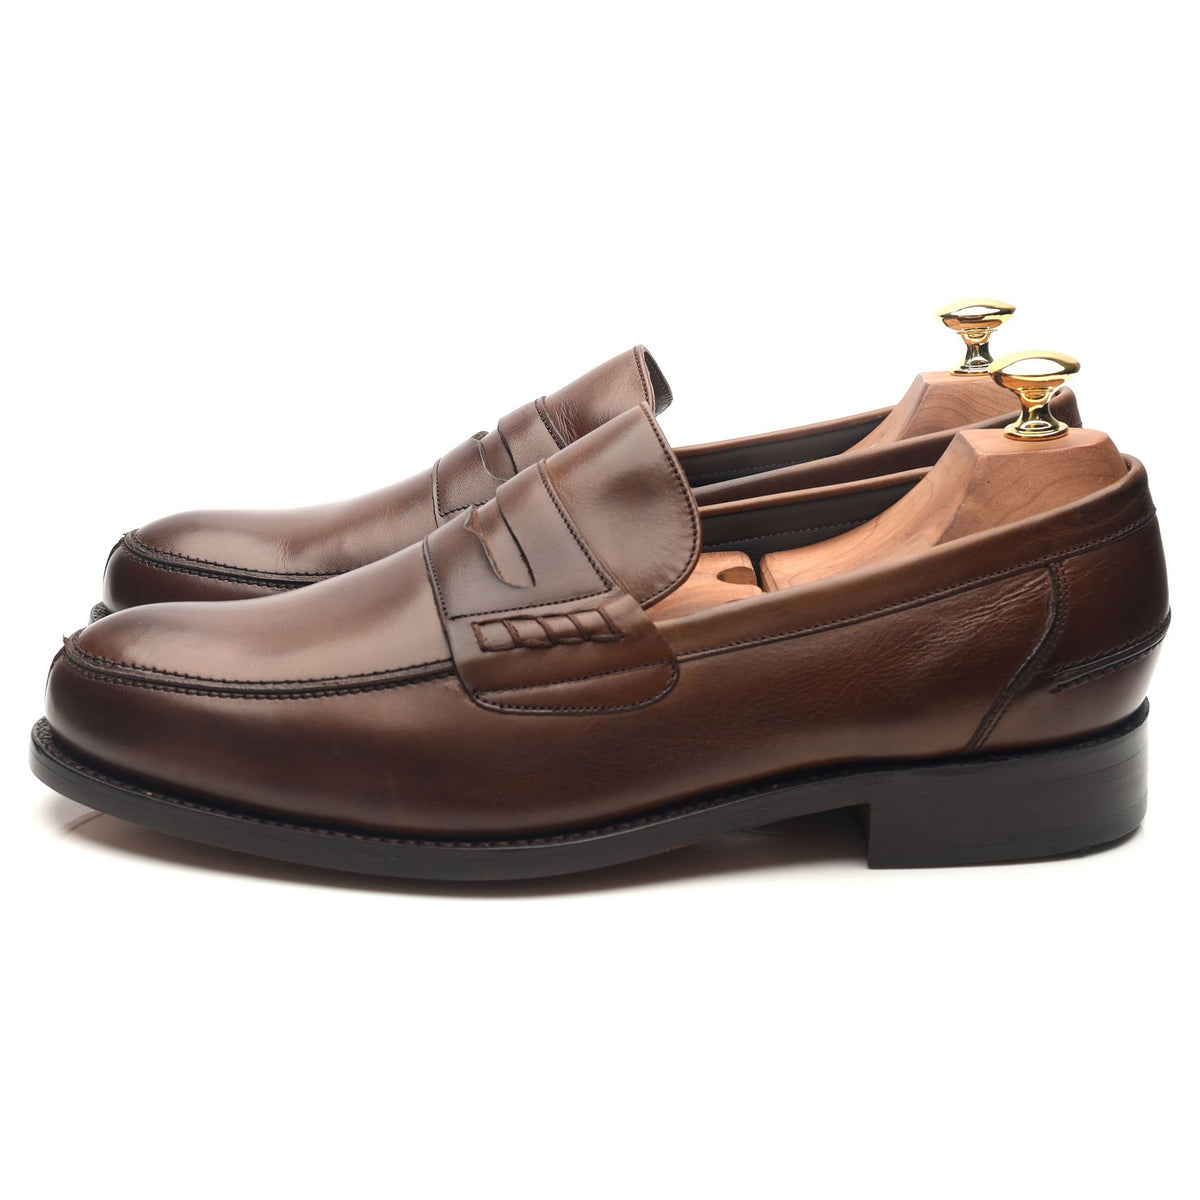 Dark Brown Leather Loafers UK 9 G